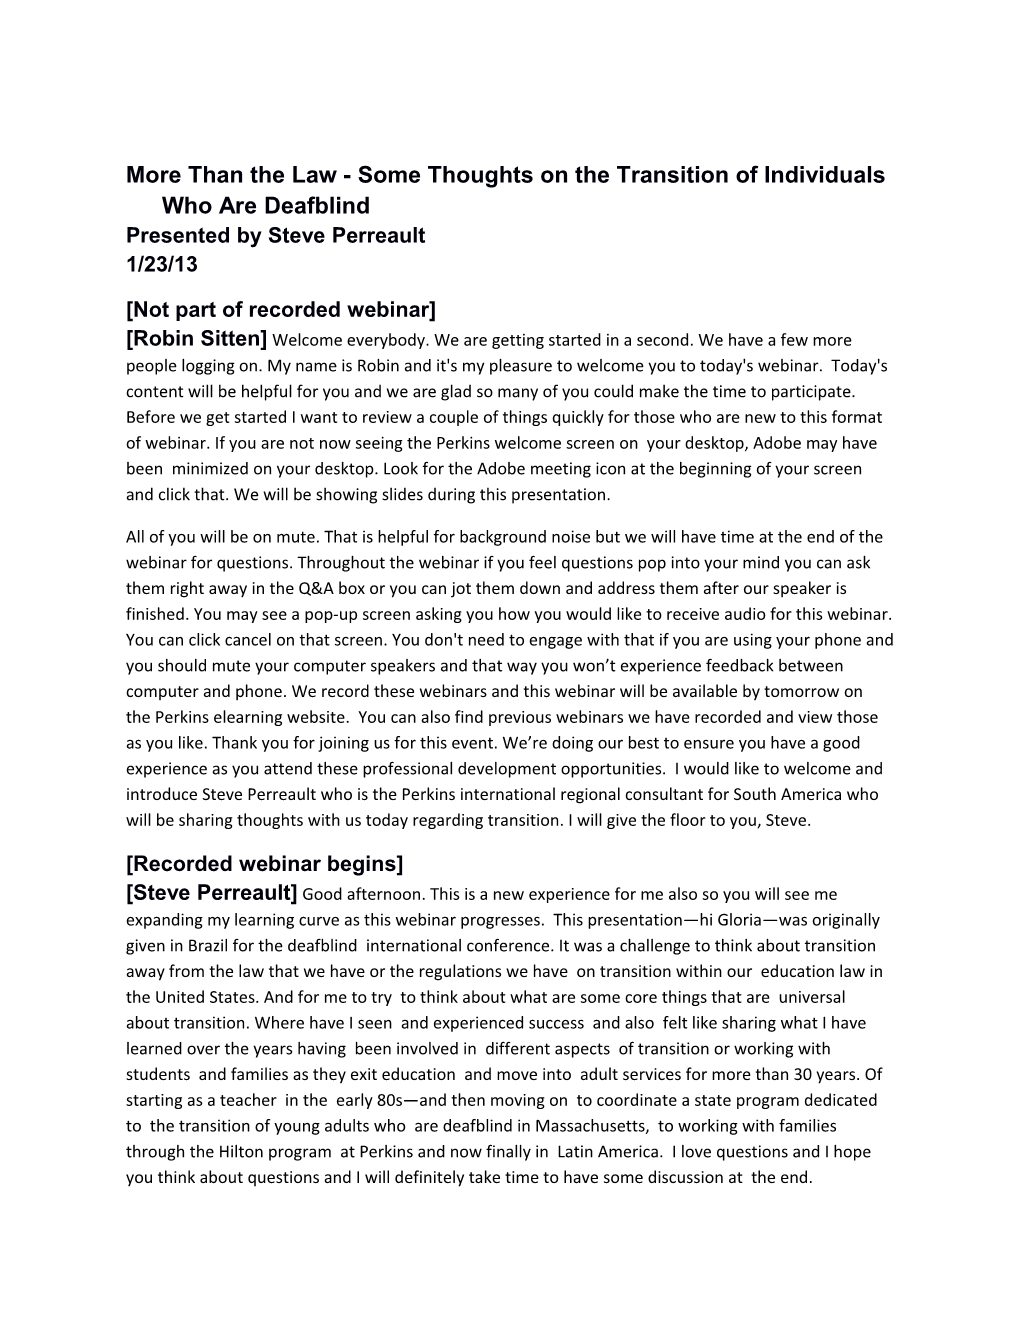 More Than the Law - Some Thoughts on the Transition of Individuals Who Are Deafblind